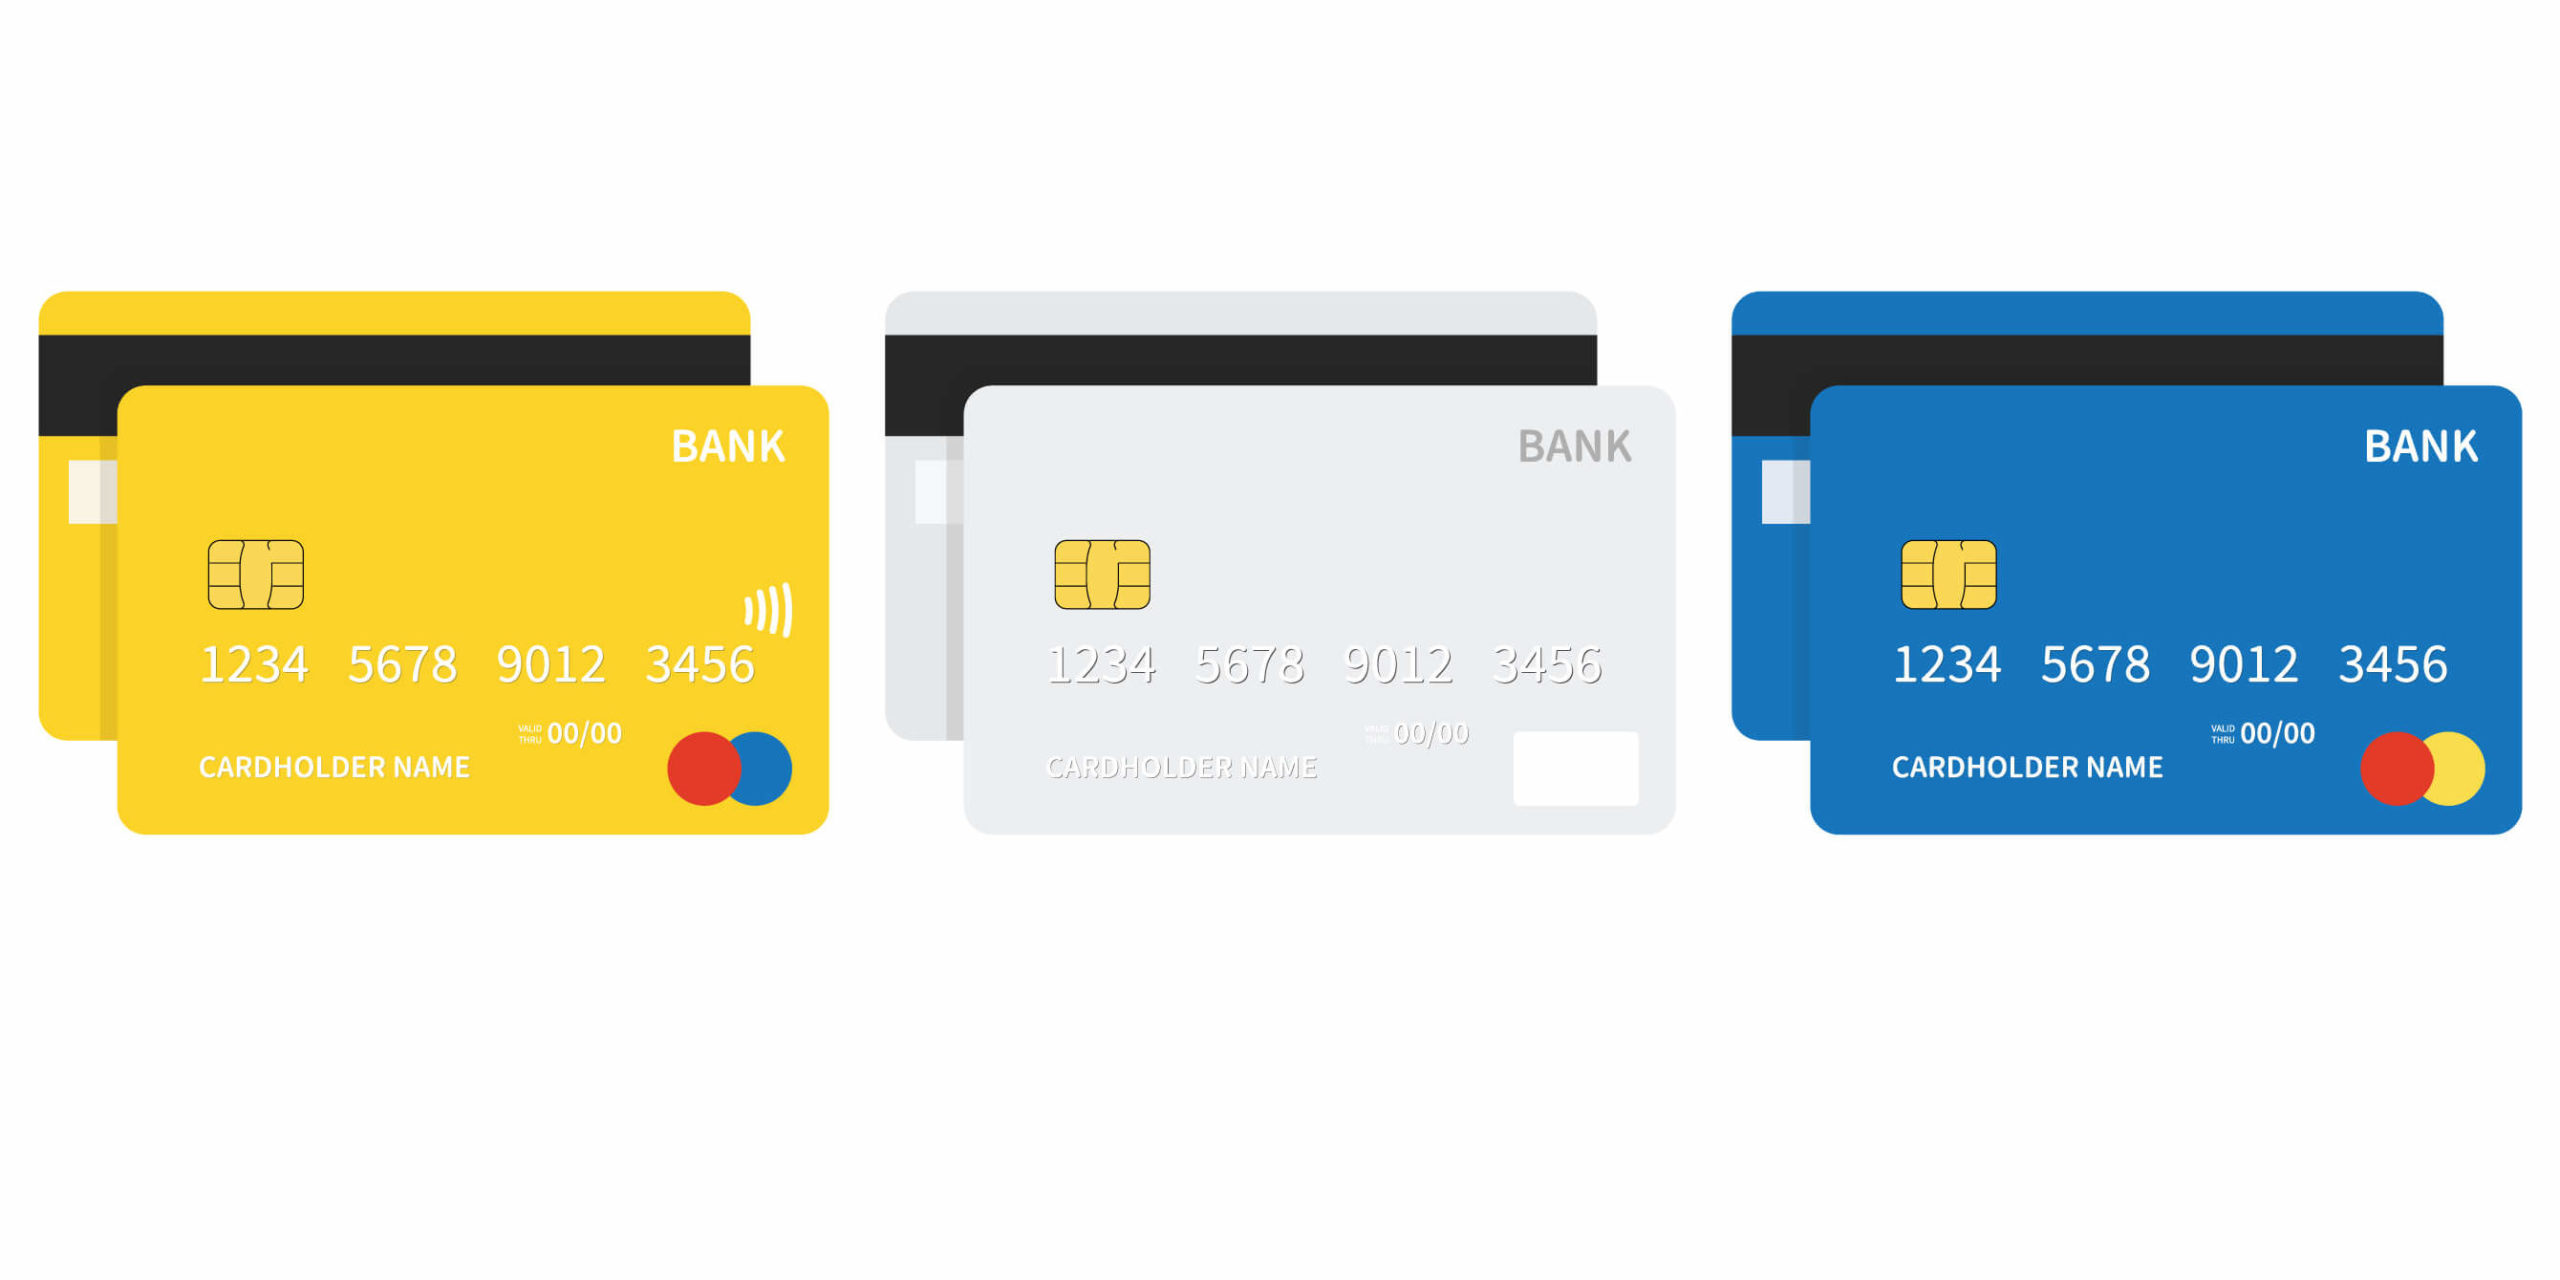 different types of credit card used for online purchase
Protection from online fraud by credit card security